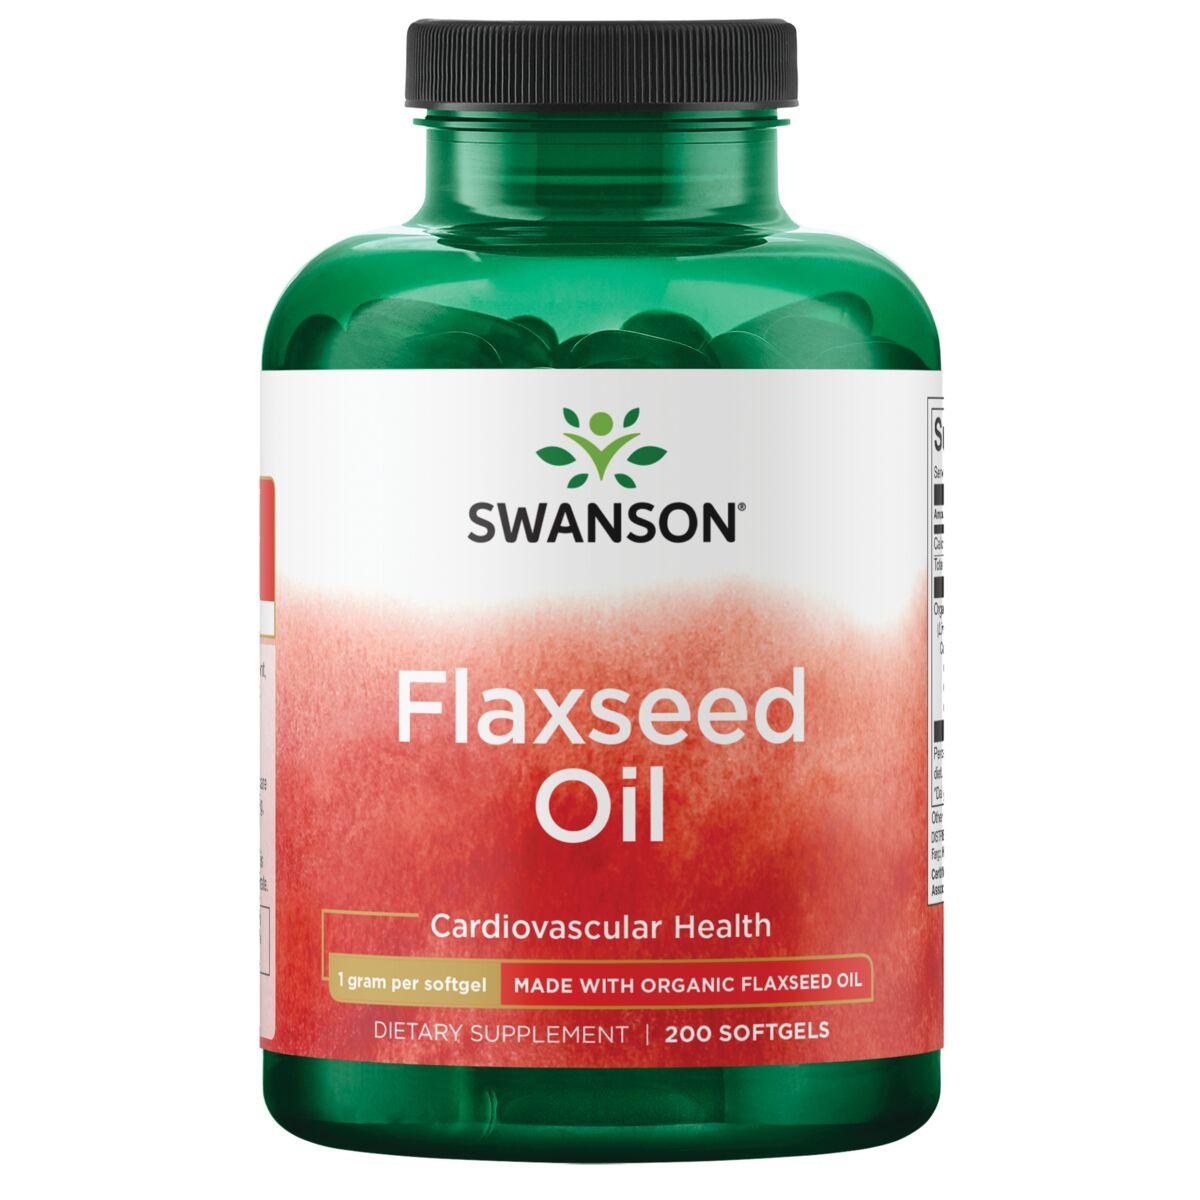 Swanson EFAs Flaxseed Oil Made with Organic Supplement Vitamin | 1 G | 200 Soft Gels